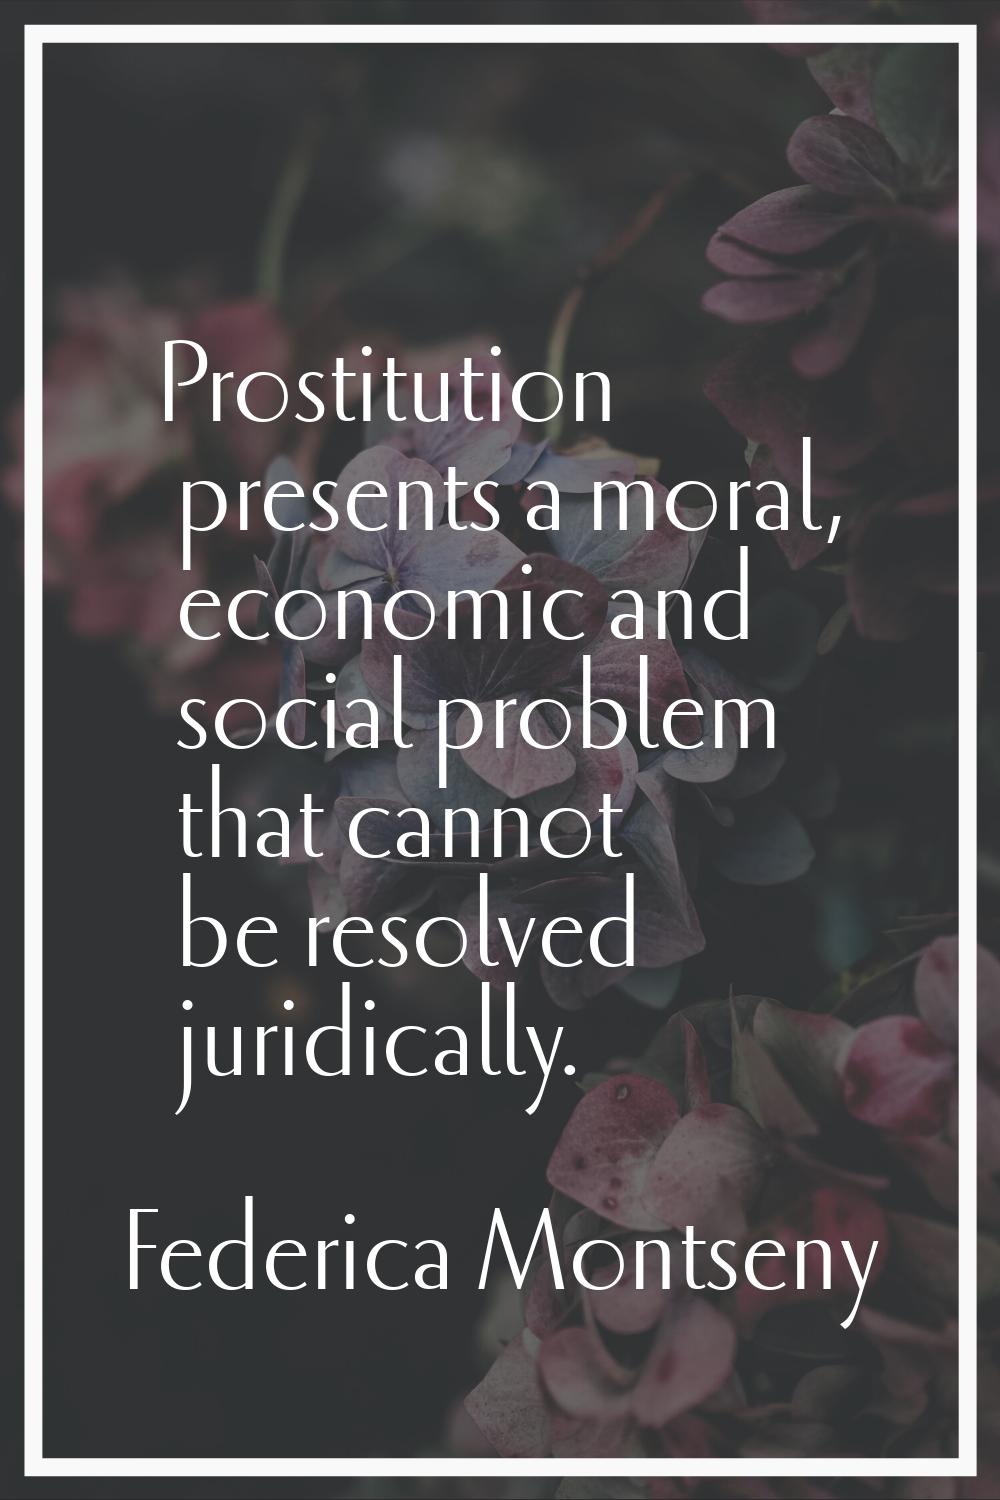 Prostitution presents a moral, economic and social problem that cannot be resolved juridically.